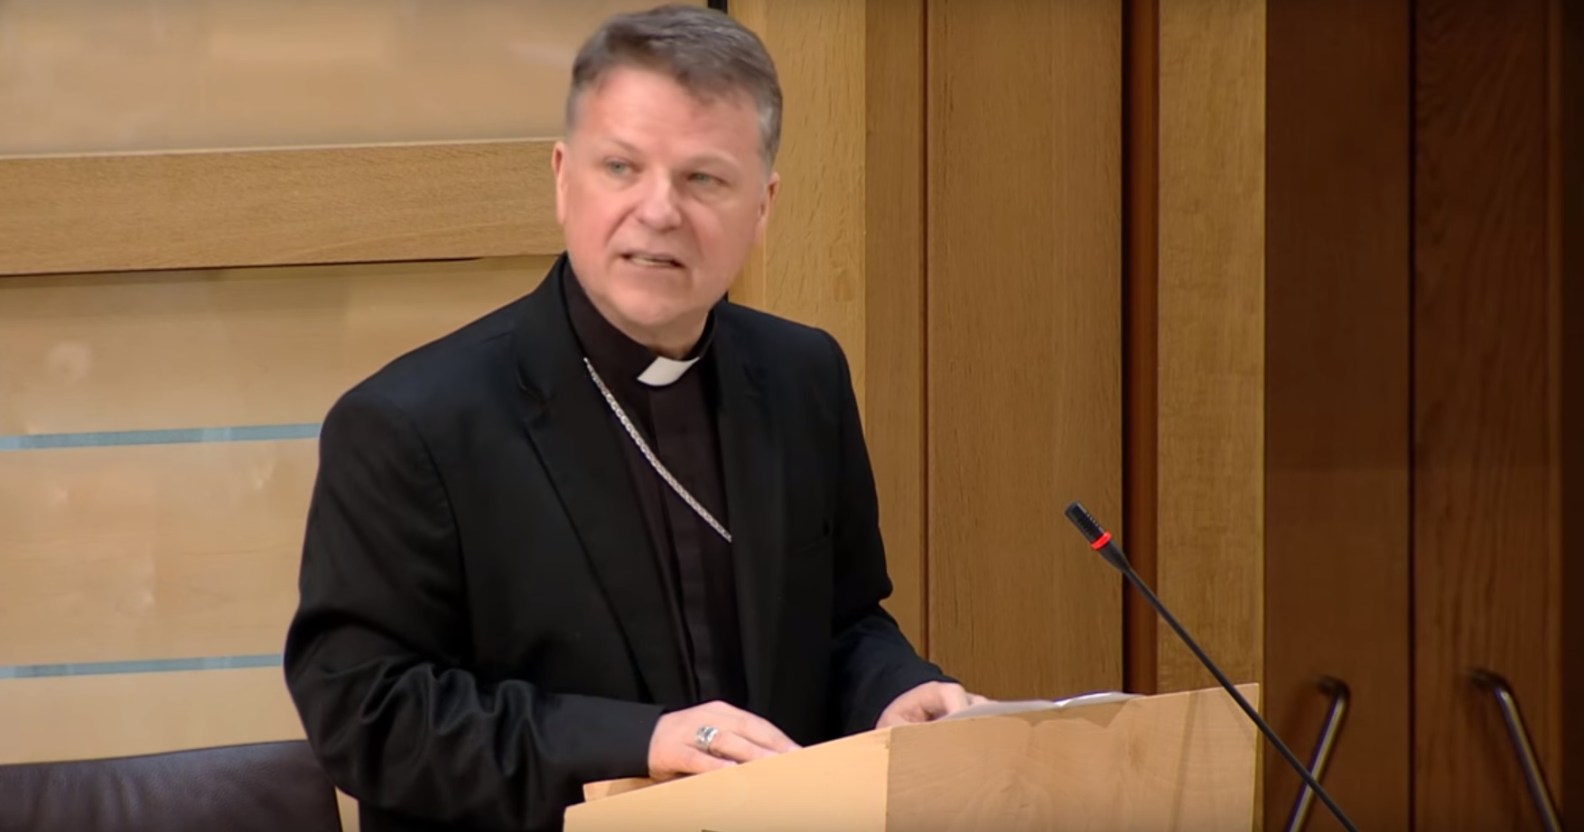 Bishop John Keenan, head of the Diocese of Paisley in Scotland, addresses the Scottish Parliament